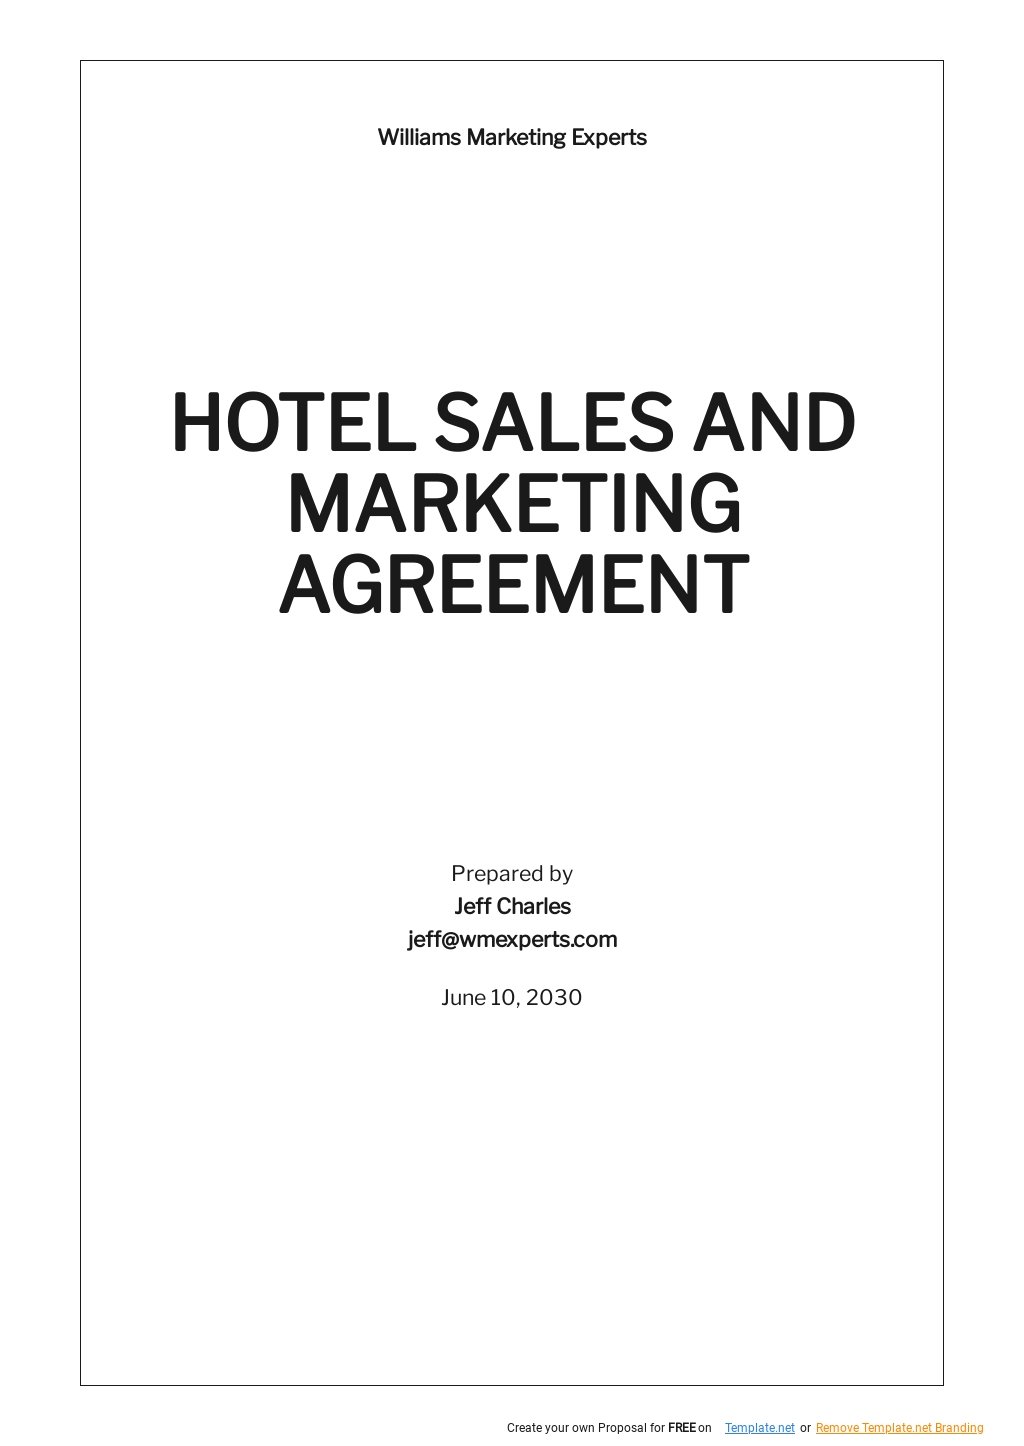 Hotel Sales and Marketing Agreement Template